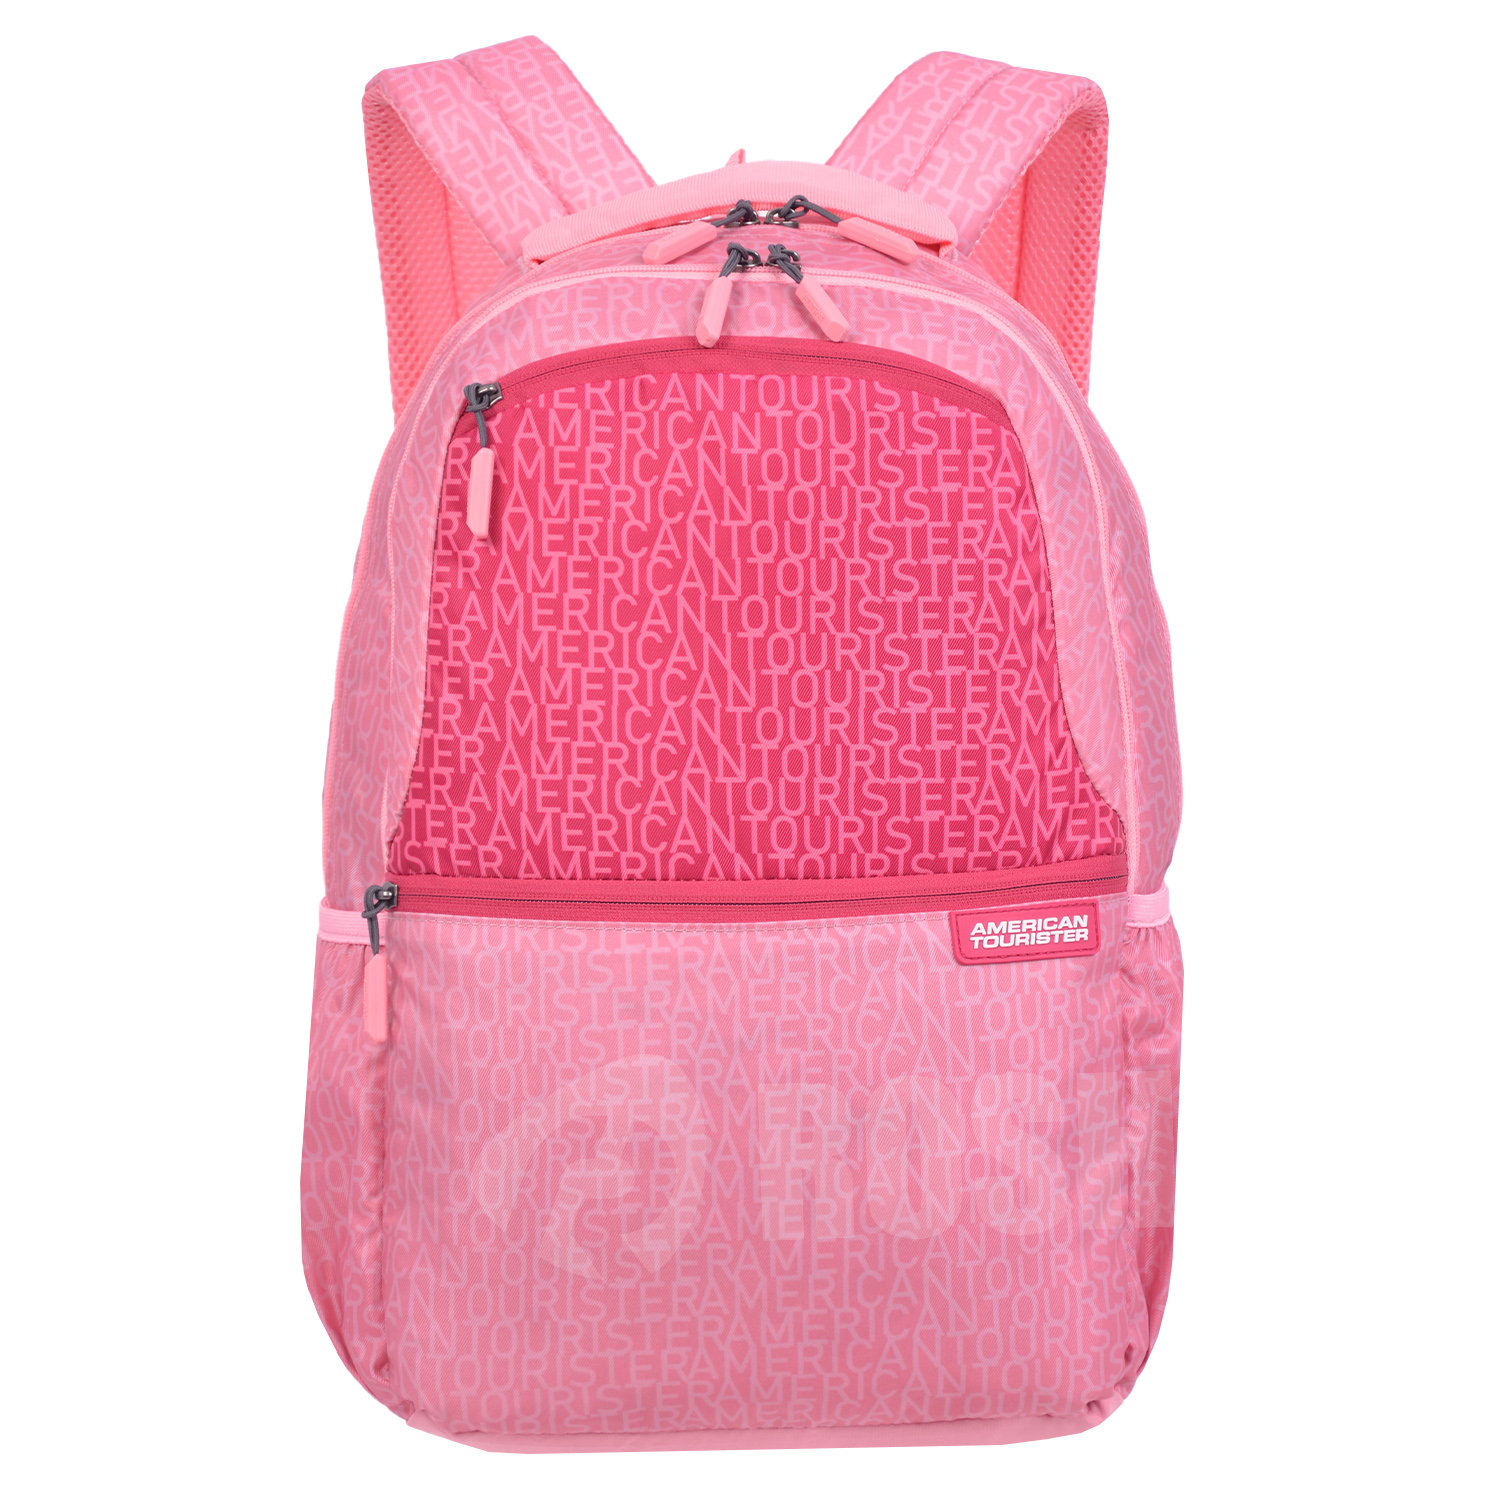 RoshanBags-ProductName